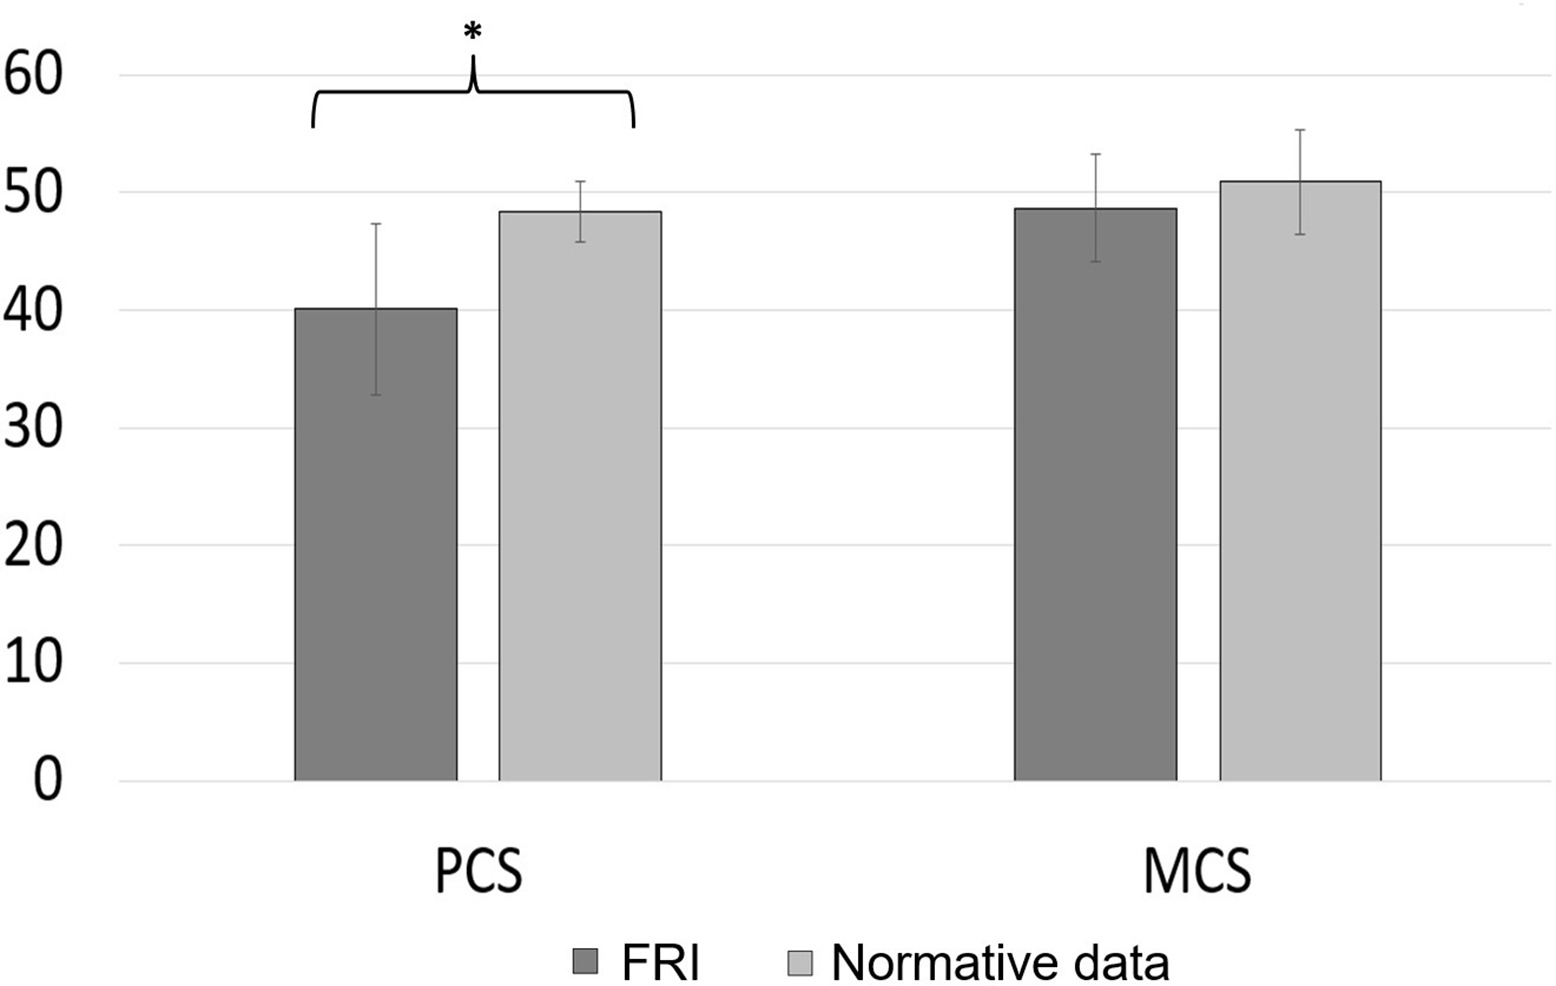 Fig. 1 
          Mean physical health component score (PCS) and mean mental health component score (MCS) assessed with the German Short-Form 36 (SF-36). The results of the fracture-related infection (FRI) cohort are shown in dark grey. For comparison, the values of the normative data are illustrated in light grey. *Significant difference.
        